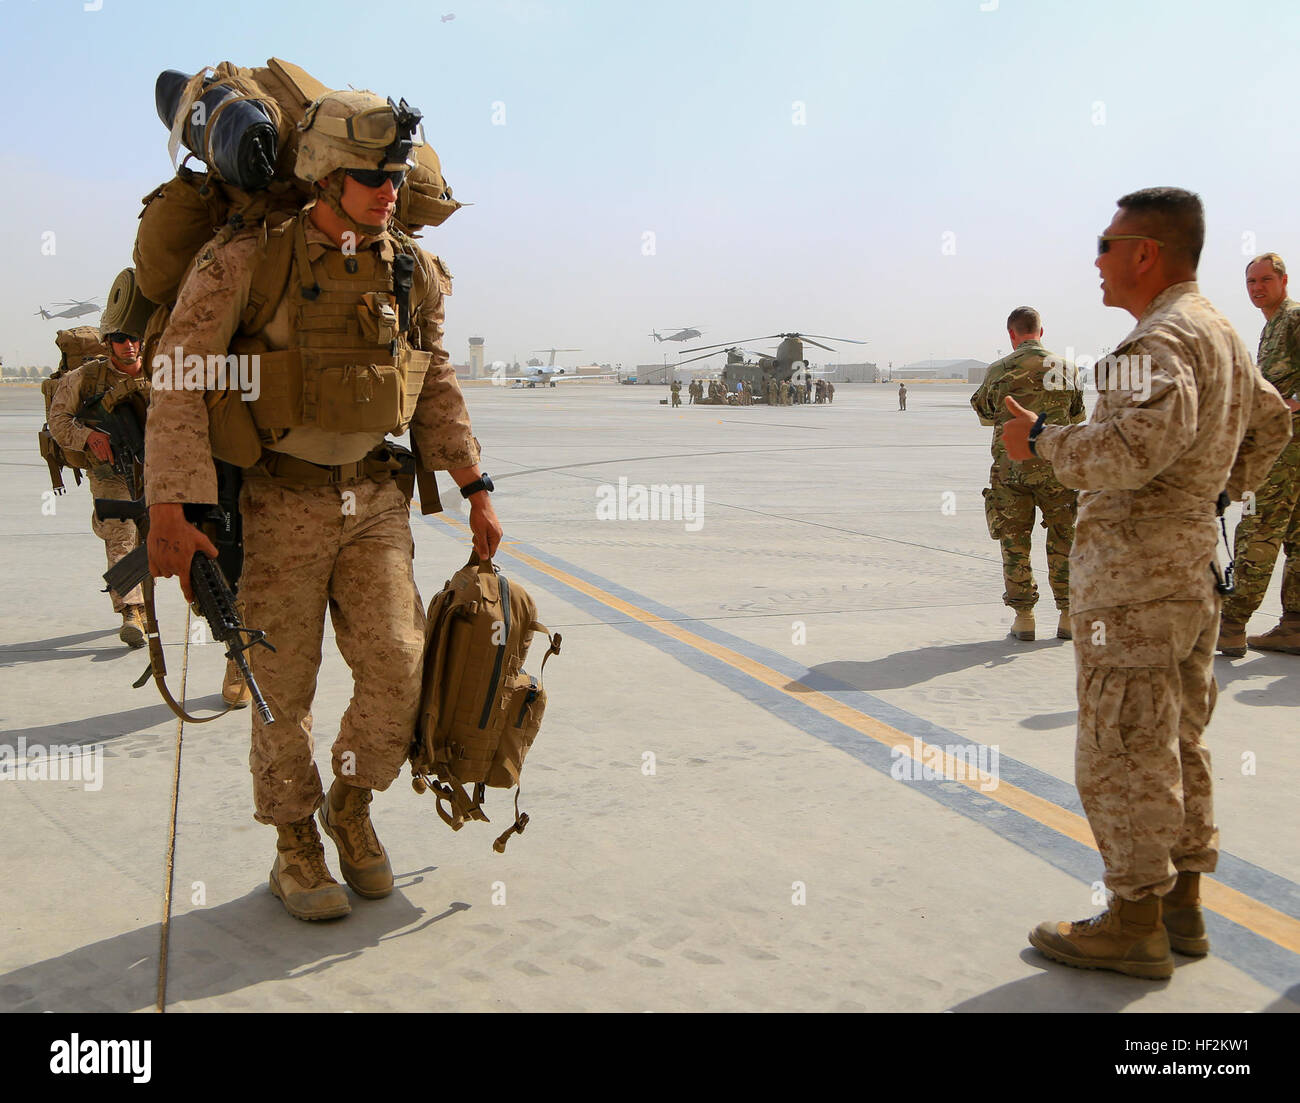 U.S. Marine Brig. Gen. Daniel D. Yoo (right), Regional Command (Southwest) (RC(SW) commanding general, gives Marines a thumbs up after arriving at Kandahar Airfield (KAF), Afghanistan, Oct. 27, 2014. The Marines transitioned to KAF following the end of RC(SW) operations in Helmand province. (Official U. S. Marine Corps photo by Sgt. Dustin D. March/Released) RC(SW) Arrives at Kandahar Airfield 141027-M-EN264-733 Stock Photo